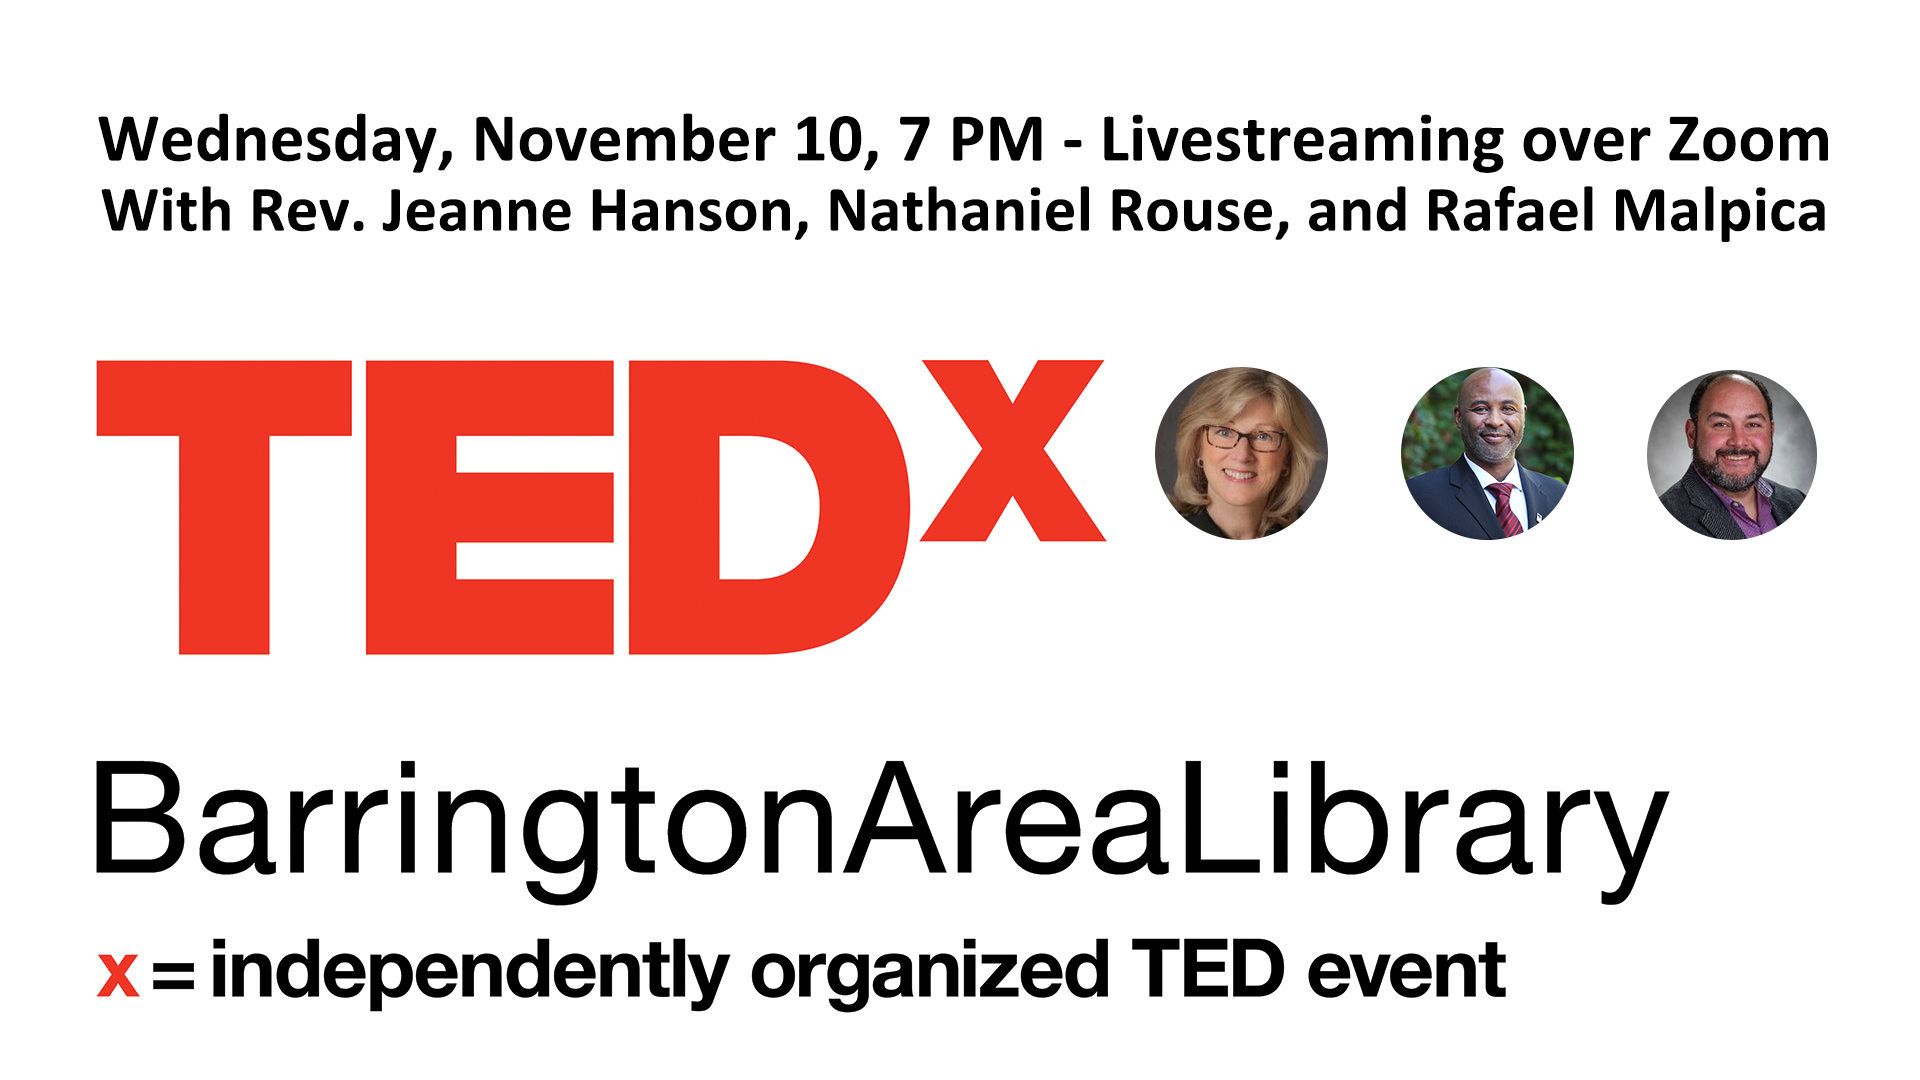 TEDxBarringtonAreaLibrary text in red, black text listing speakers name, photos of three people who will be speaking